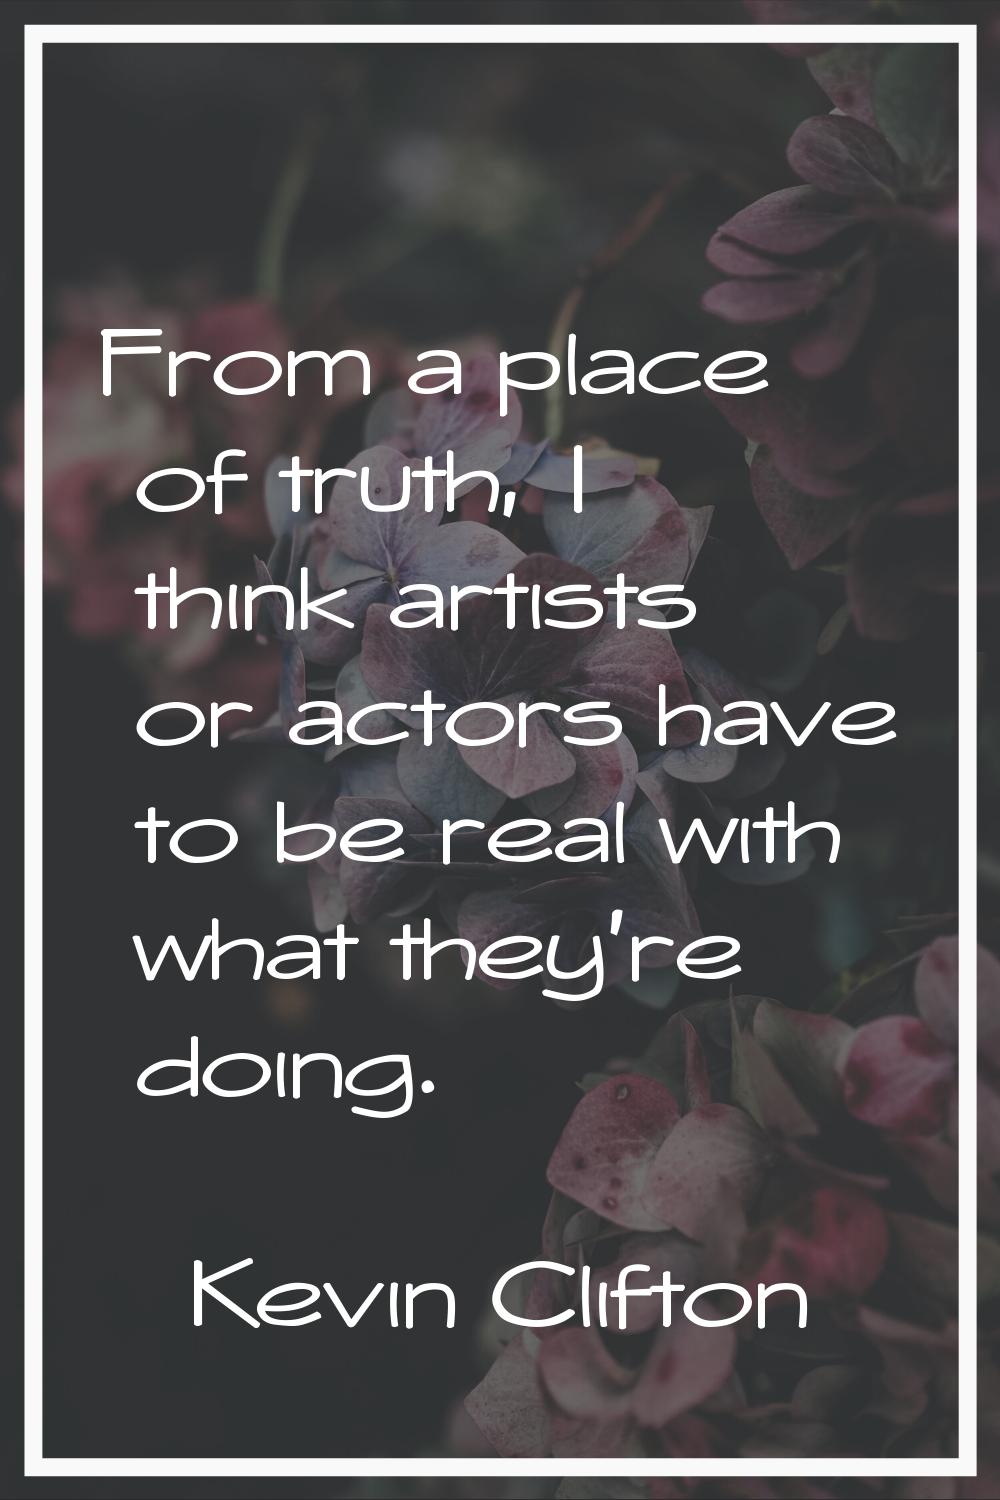 From a place of truth, I think artists or actors have to be real with what they’re doing.